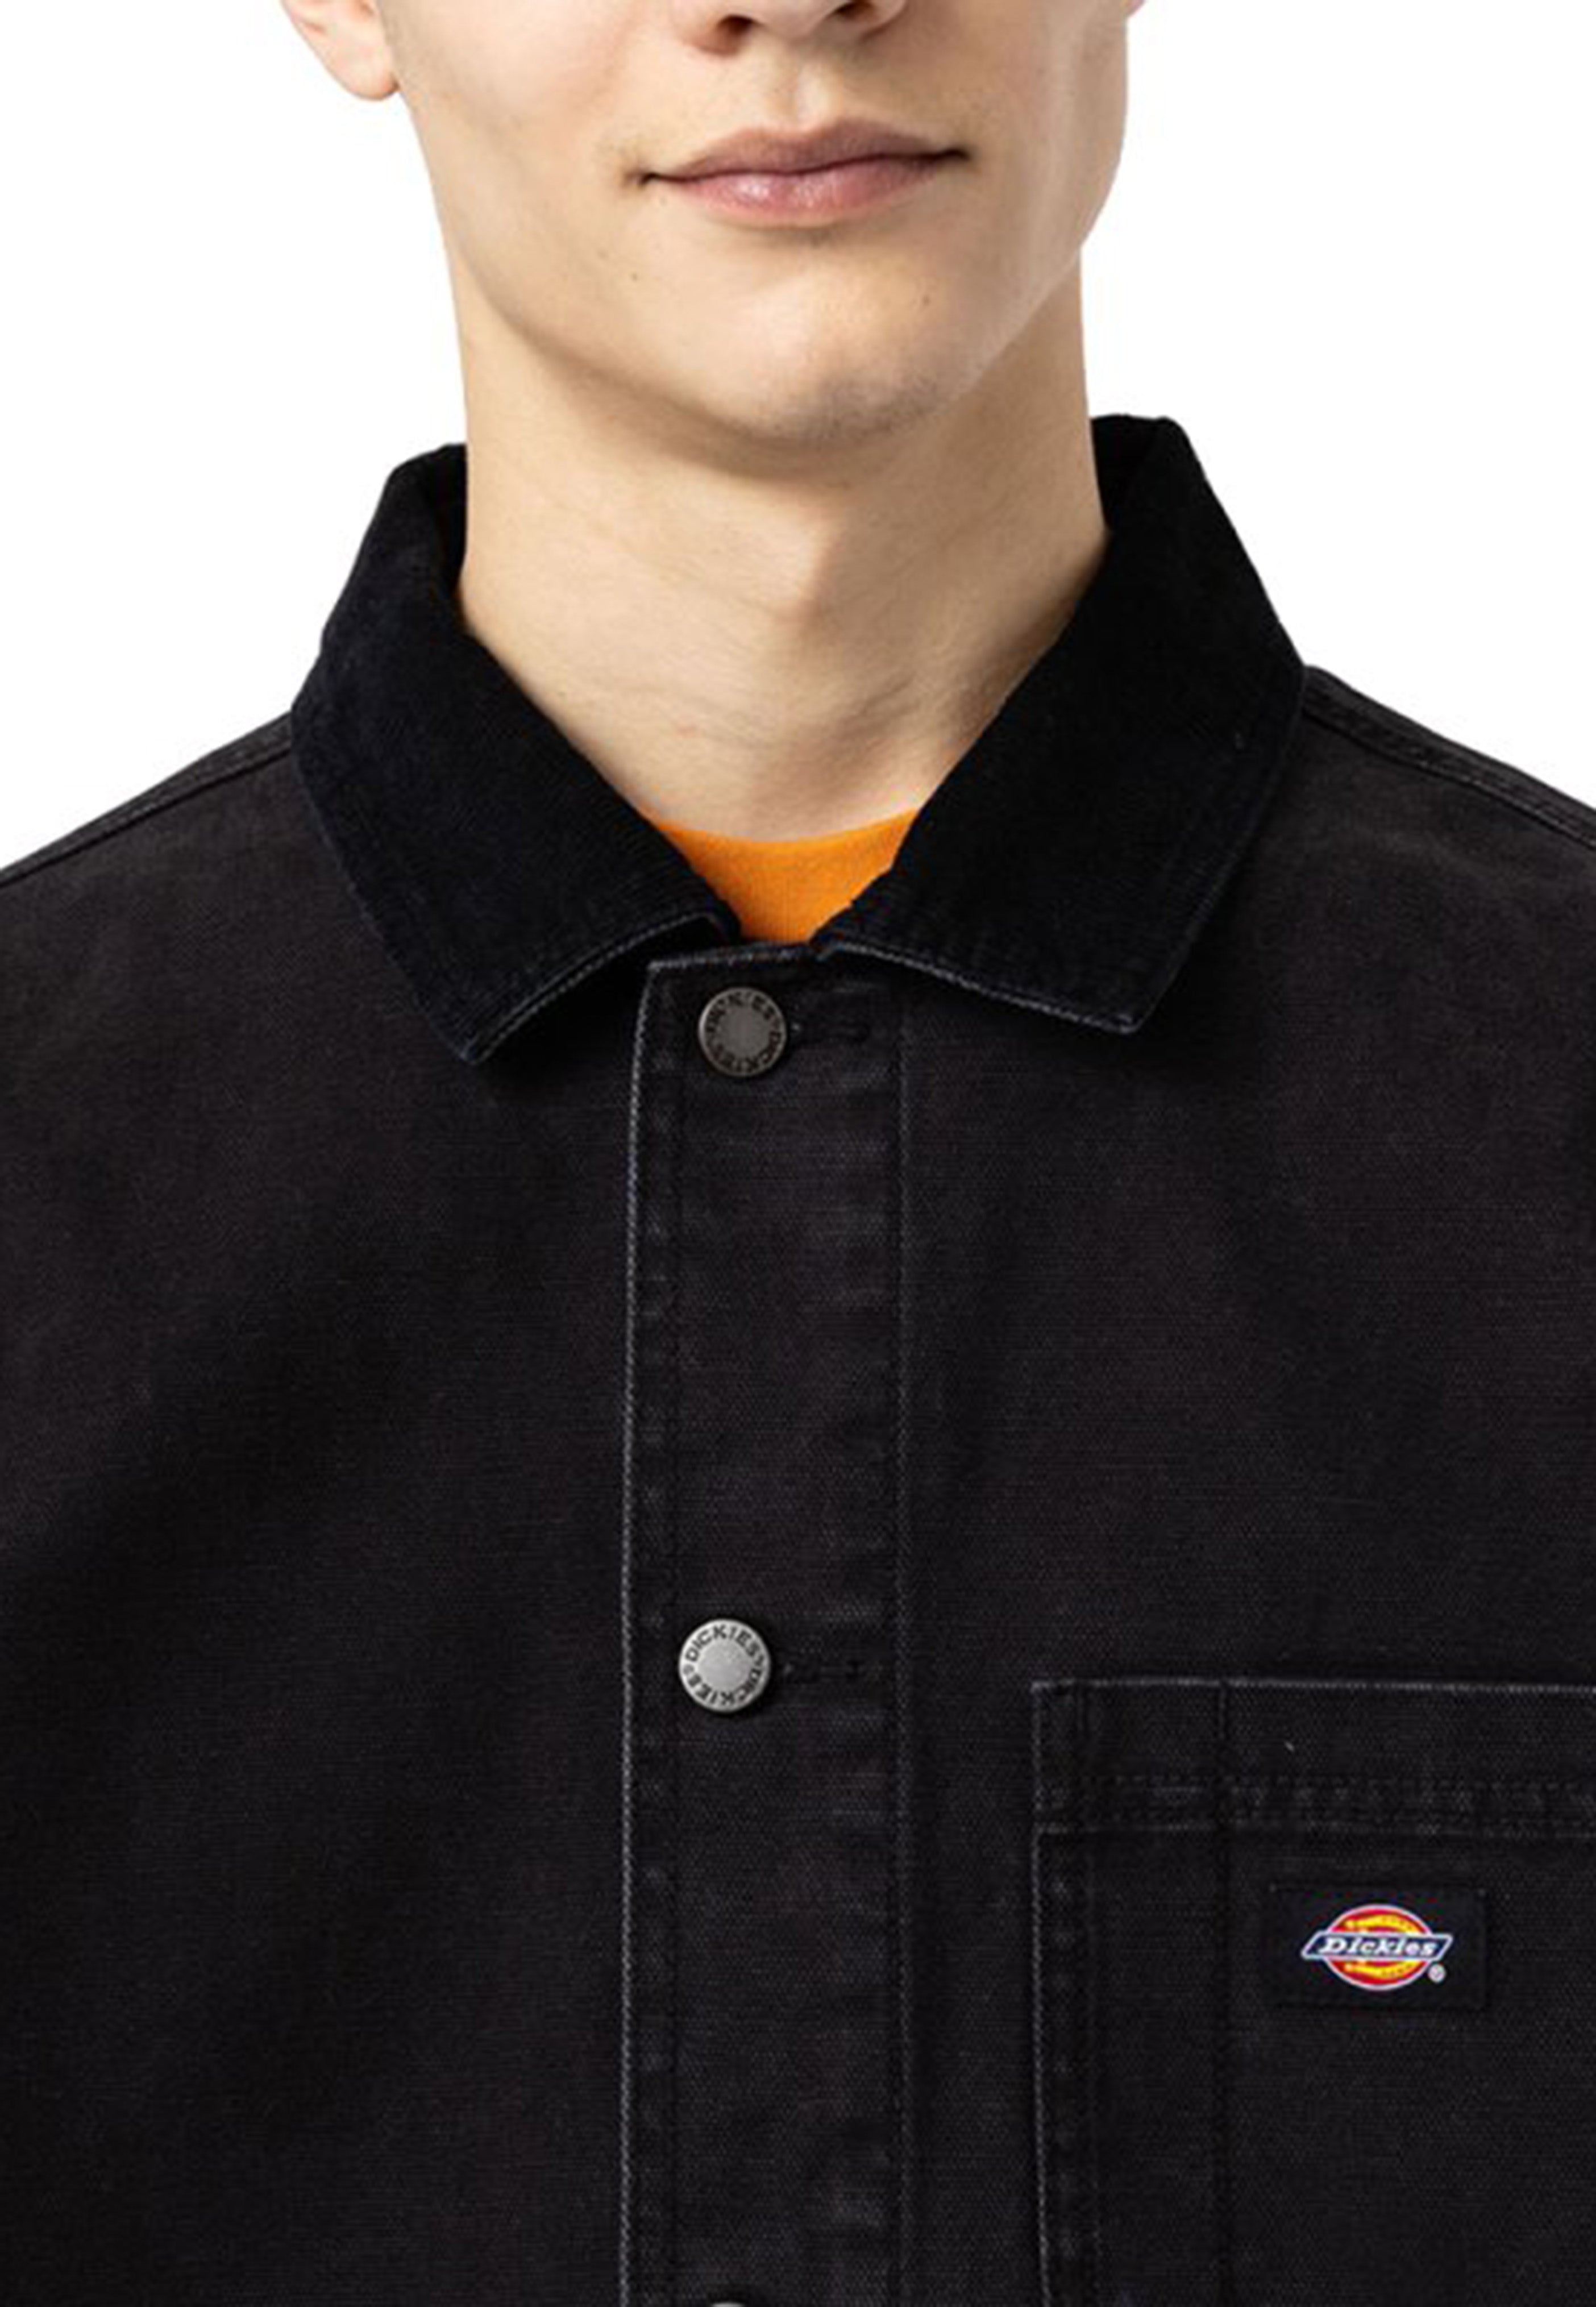 Dickies - Duck Canvas Summer Chore Stone Washed Black - Jacket